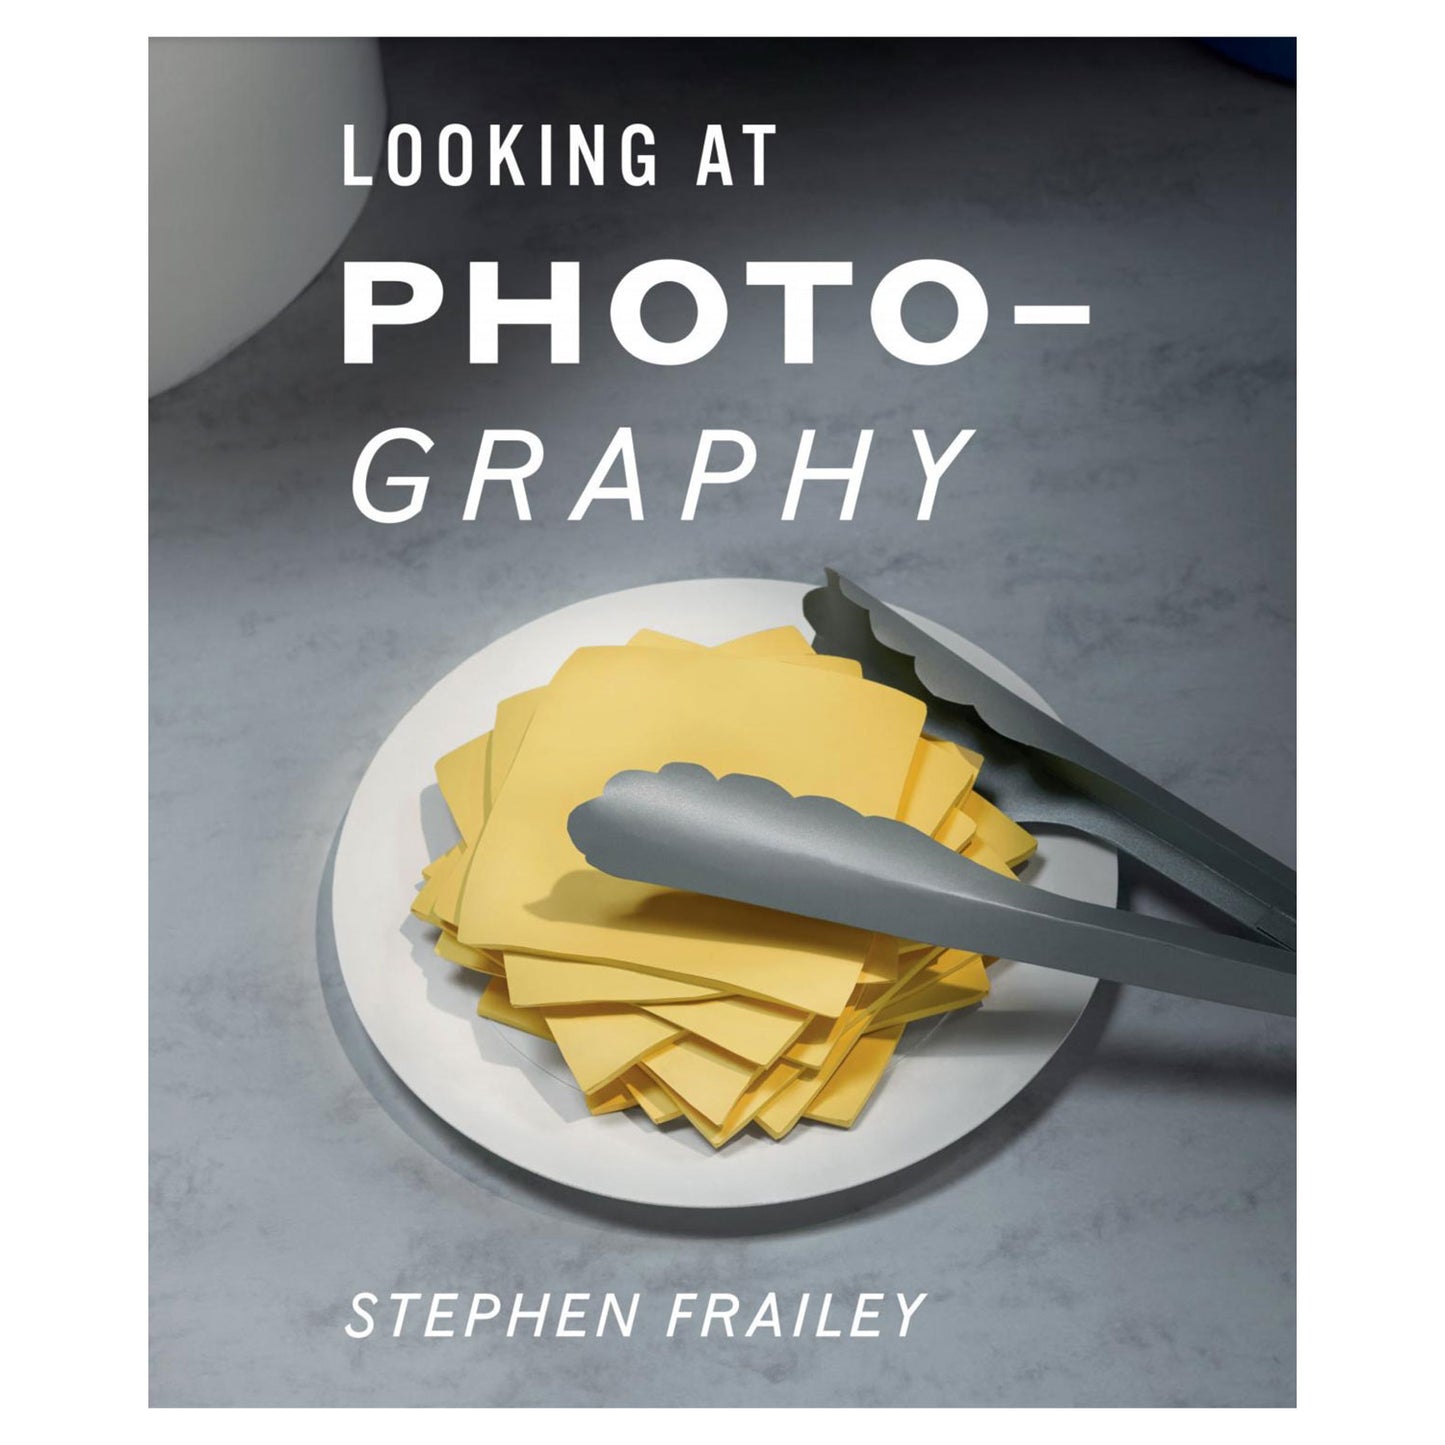 Looking at Photography by Stephen Frailey. Photo Museum Ireland.